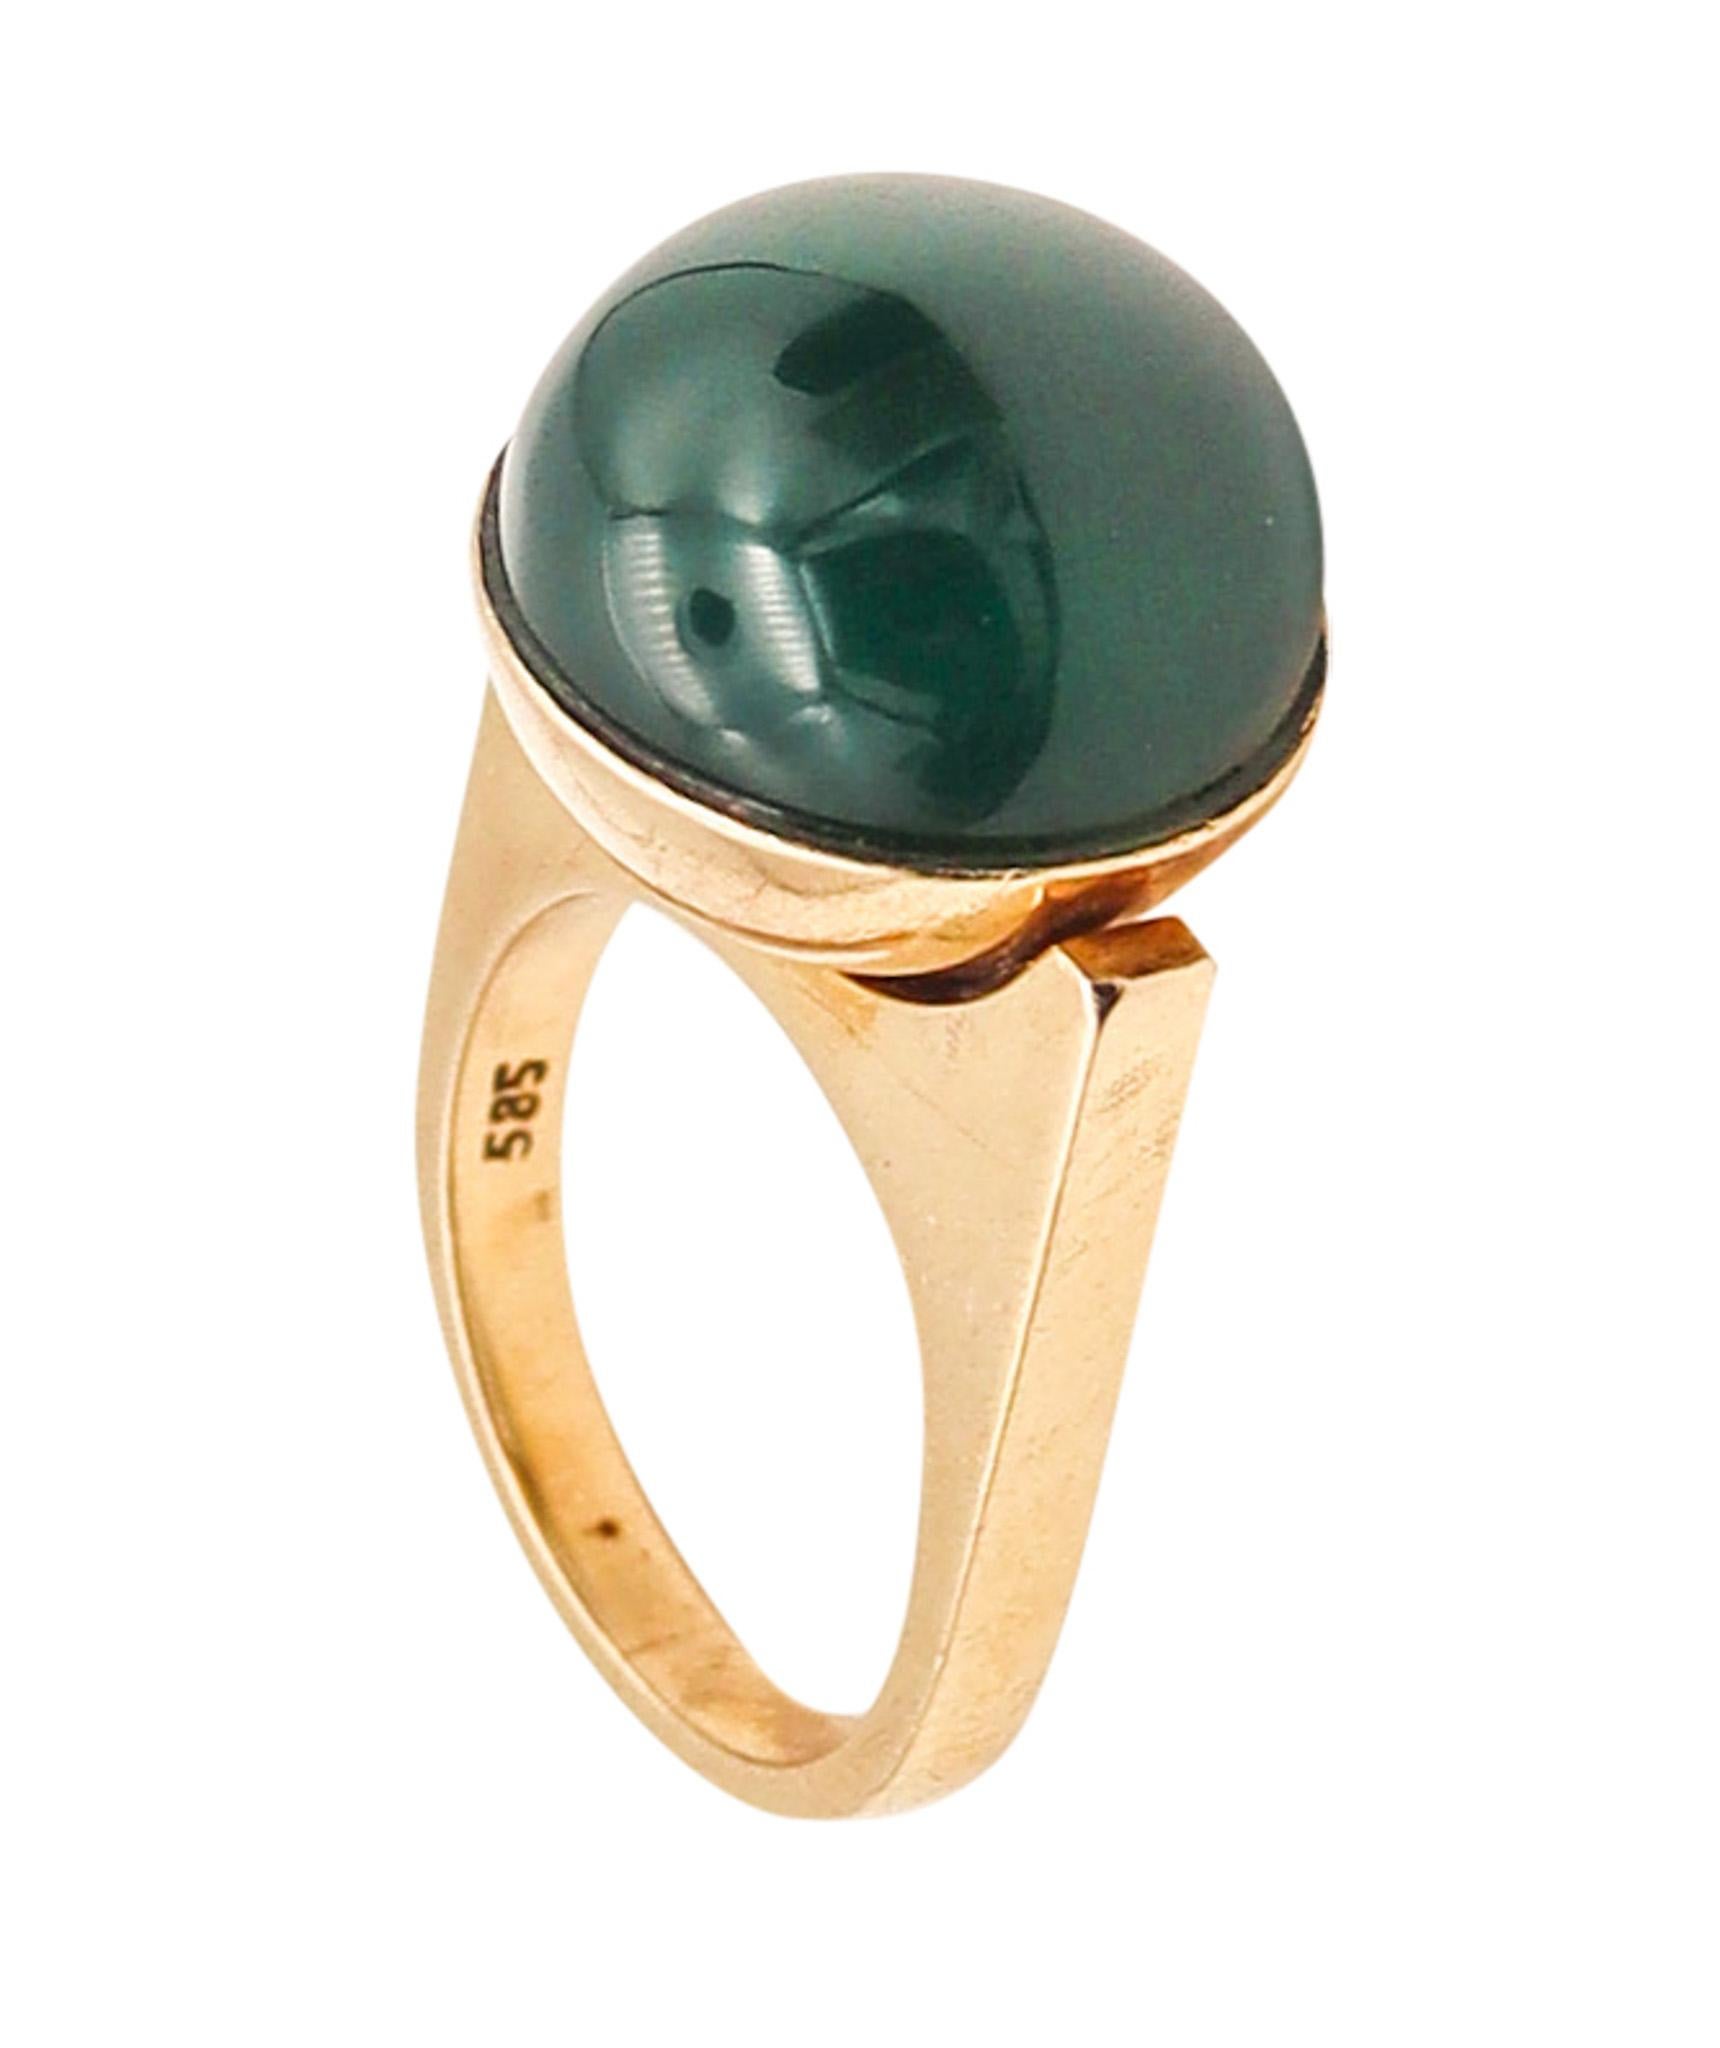 Knud V. Andersen 1970 Geometric Sculptural Ring In 14Kt Gold With Chrysoprase